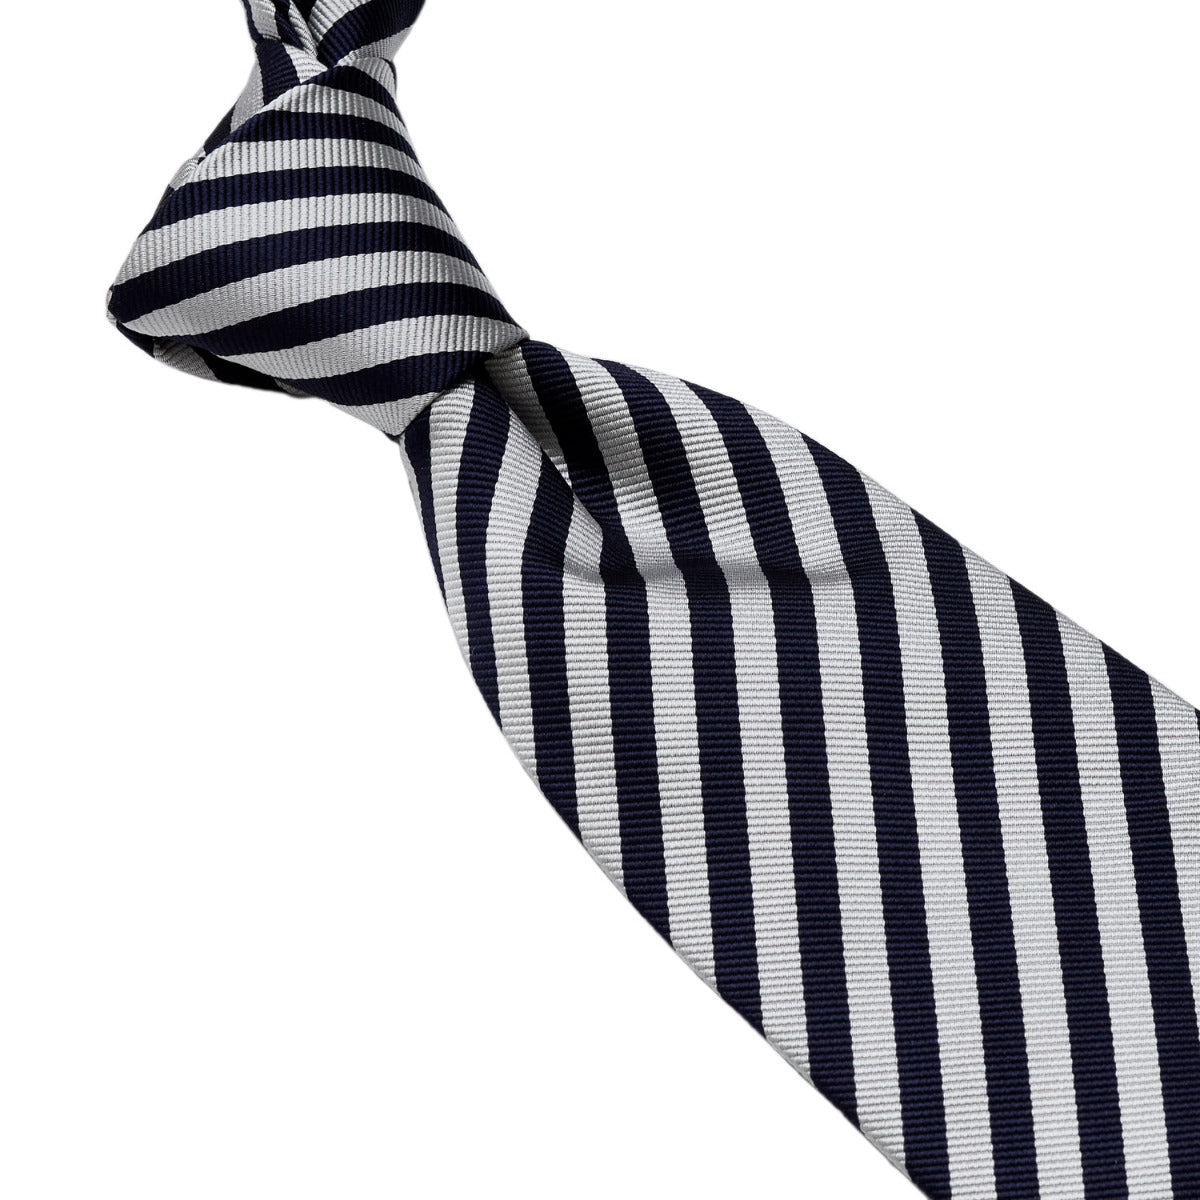 A Sovereign Grade Navy and Silver London Stripe Silk Tie by KirbyAllison.com on a white background.